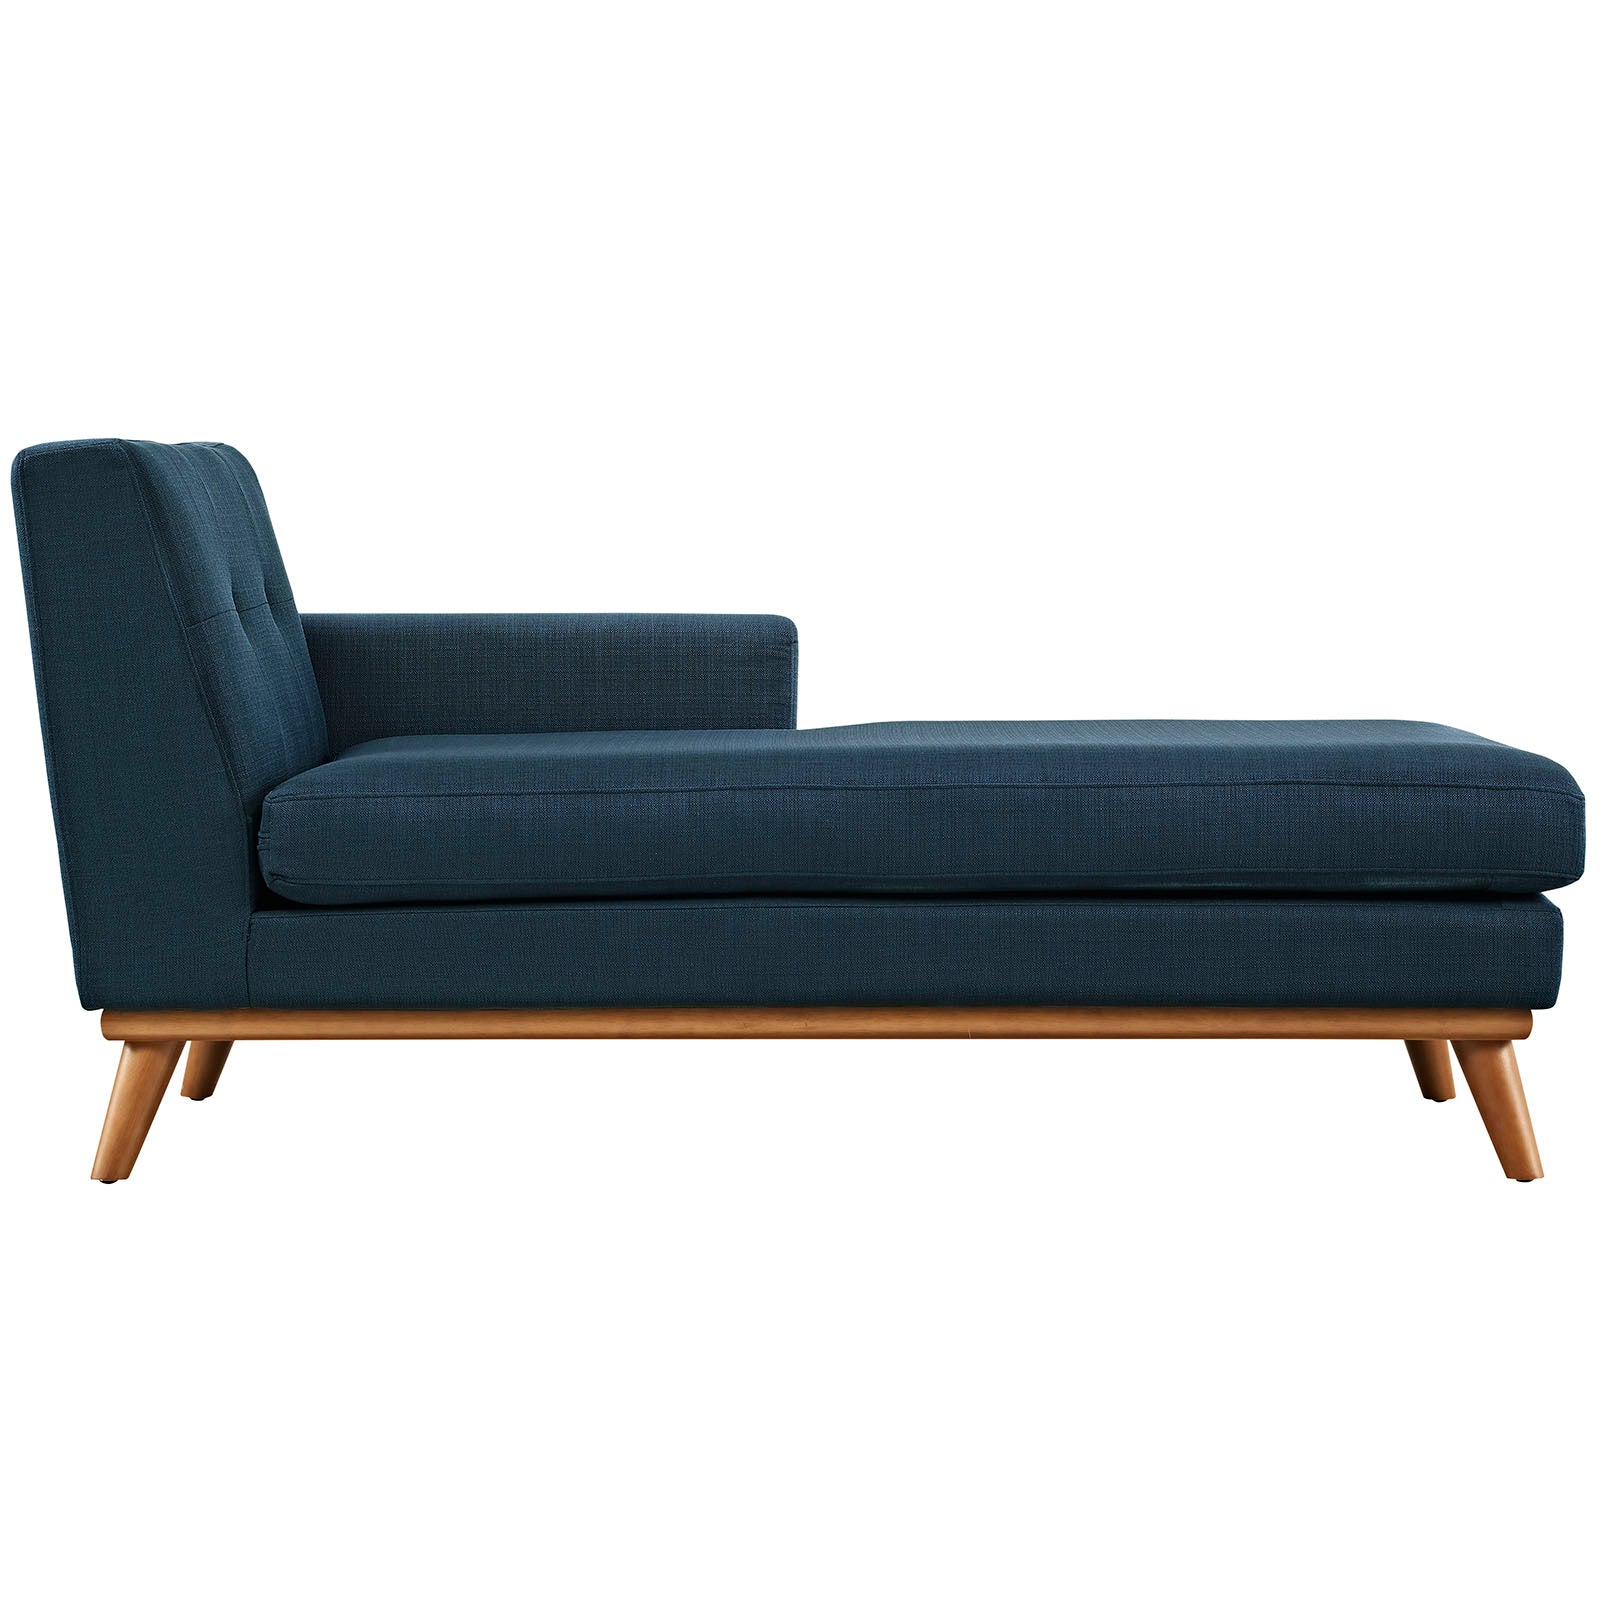 Modway Sleepers & Futons - Engage Right-Facing Chaise Azure